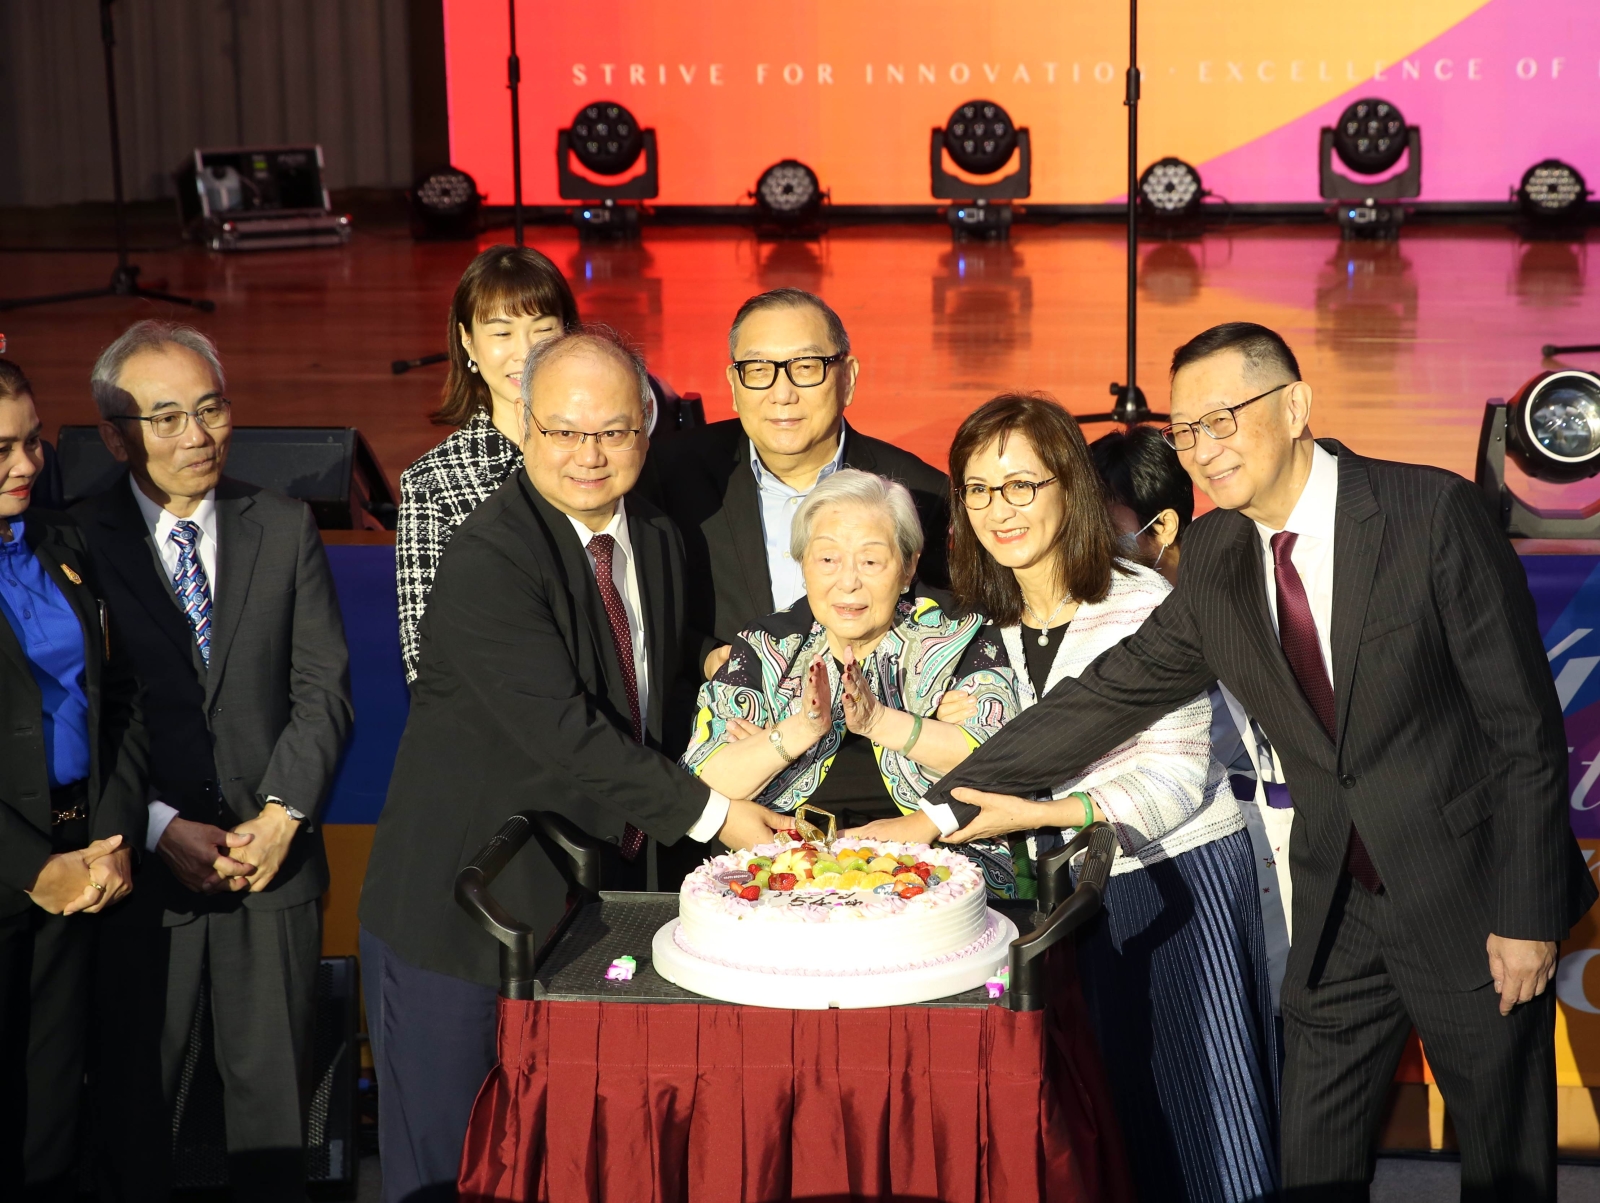 The Lunghwa founder, Shu-Chuan Chen Sun, and Chairman Tao-Heng Sun joined the faculty, students, and alums in wishing the university a happy birthday.